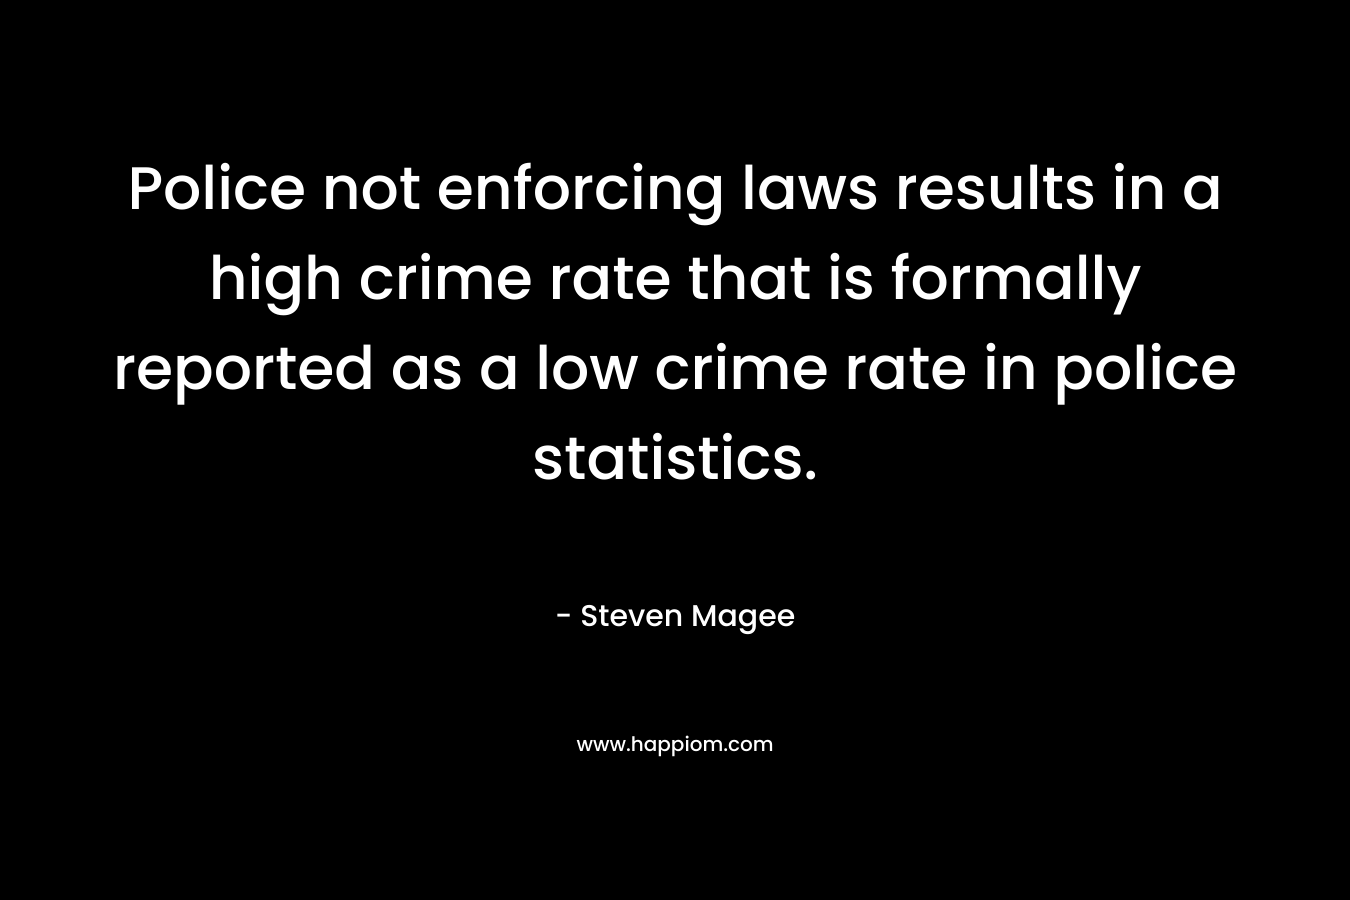 Police not enforcing laws results in a high crime rate that is formally reported as a low crime rate in police statistics.